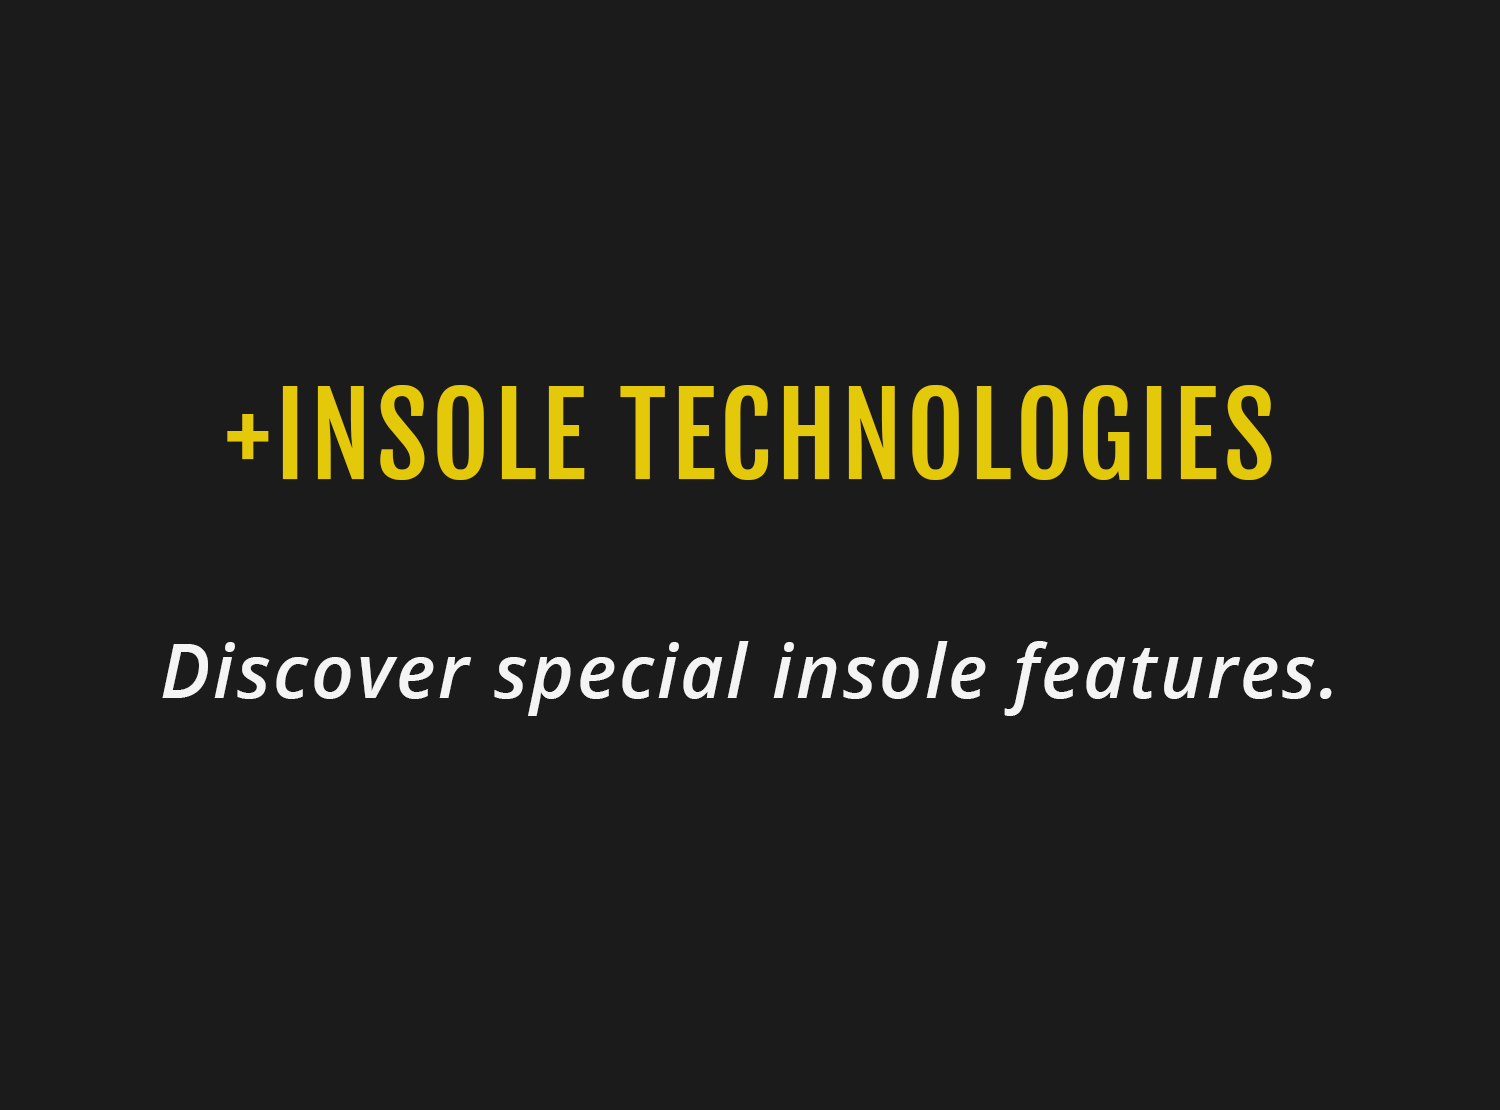 INSOLE TECHNOLOGIES